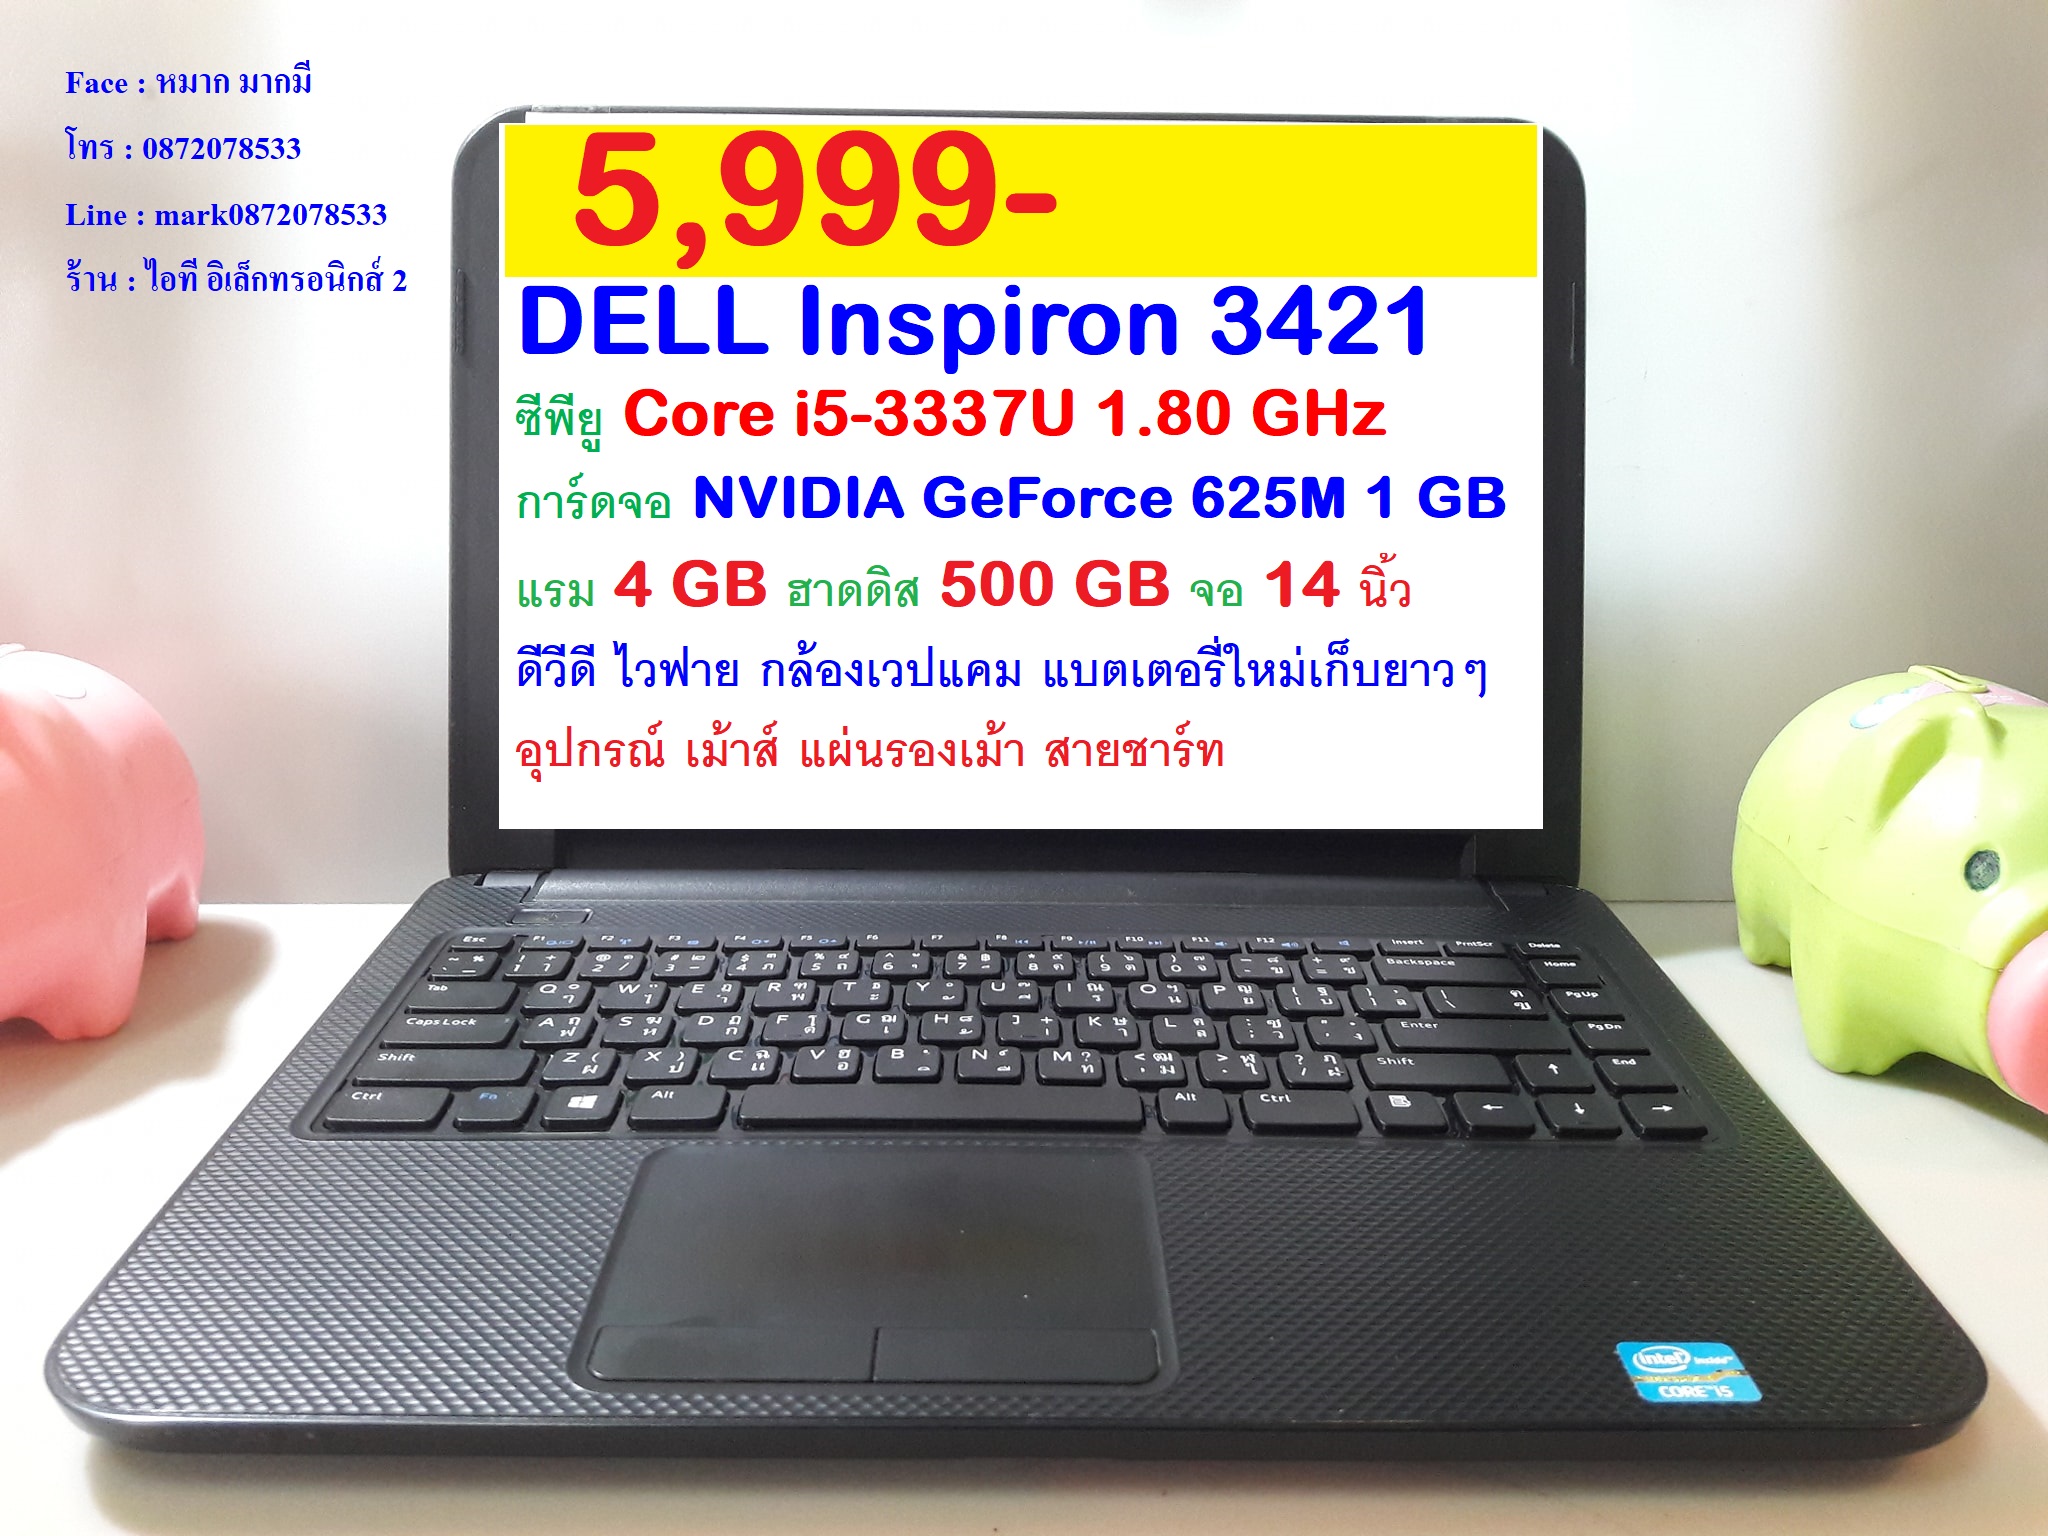 DELL Inspiron 3421 รูปที่ 1